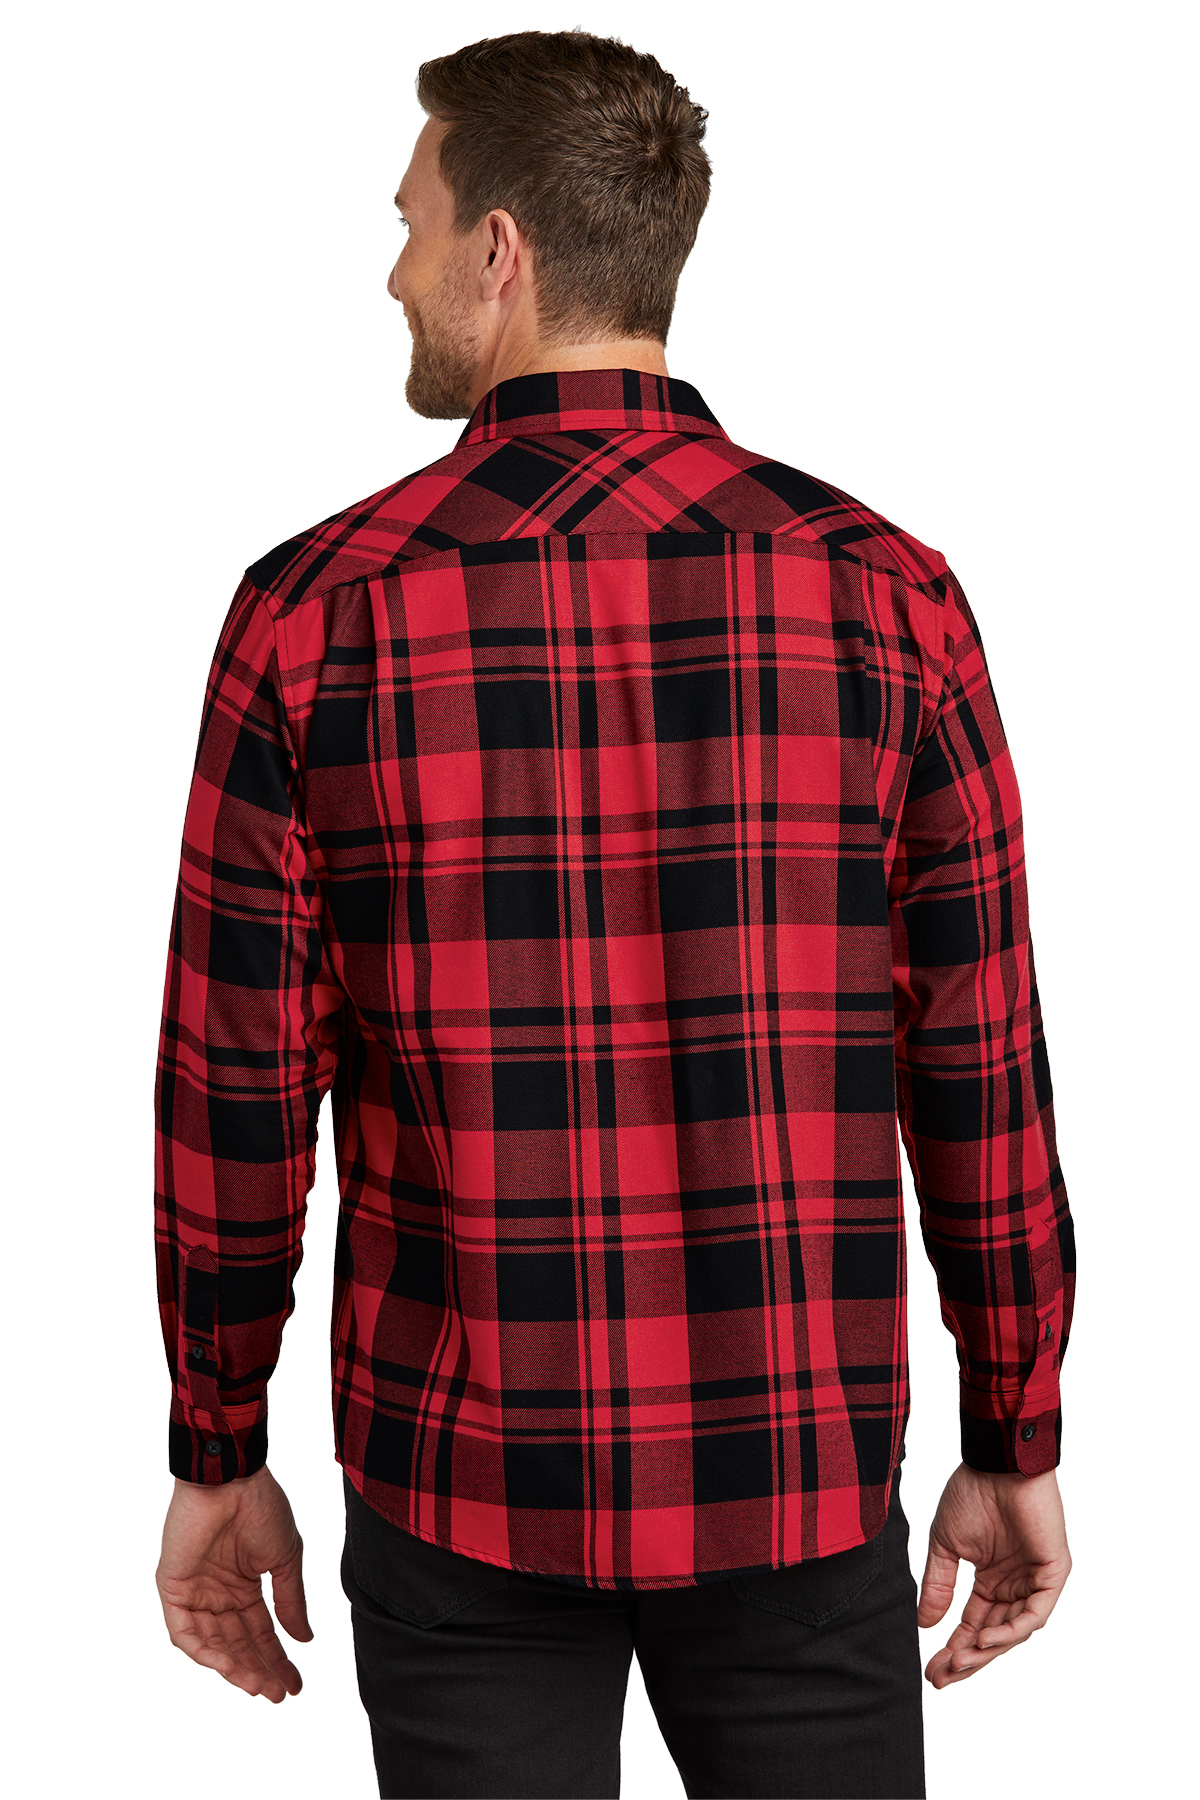 Men's Classic Flannel Shirt | Handcrafted USA | Red Buffalo | Small | Vermont Flannel